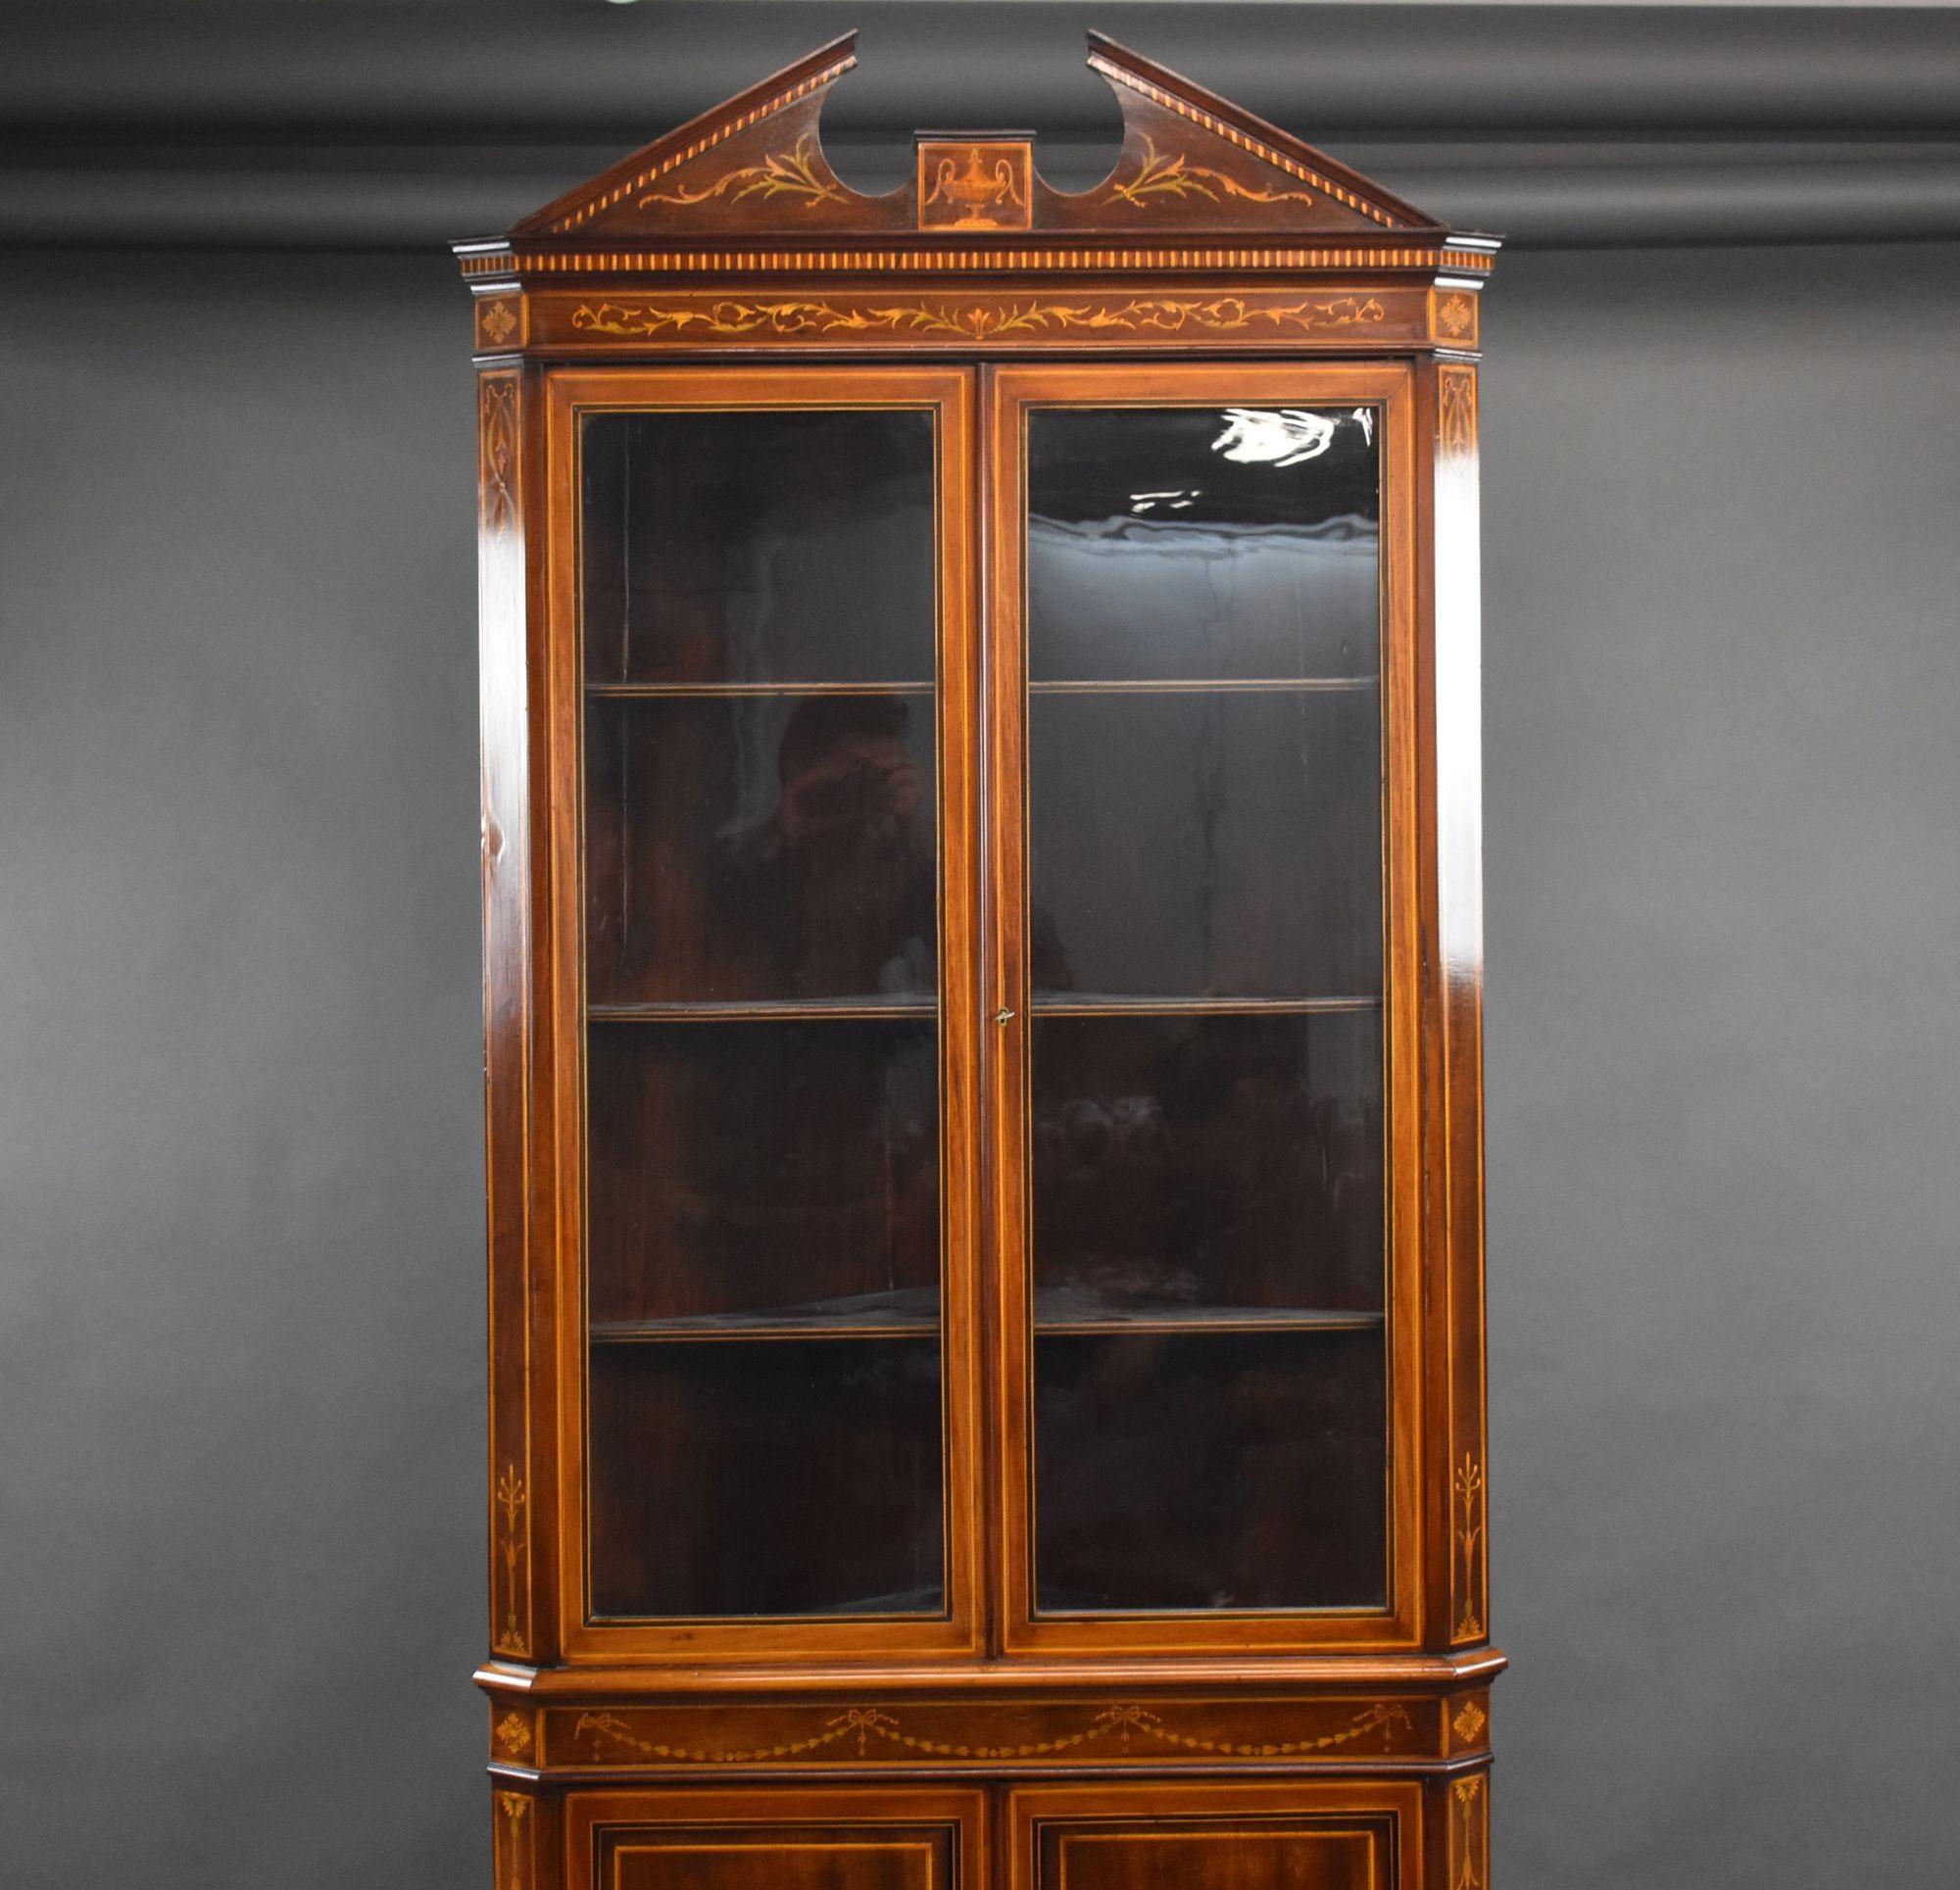 For sale is a top quality Edwardian inlaid corner cabinet, having an inlaid broken arch pediment, above two glazed doors opening to reveal a single removable shelf, above two cupboard doors, each finely inlaid with marquetry. The cabinet stands on